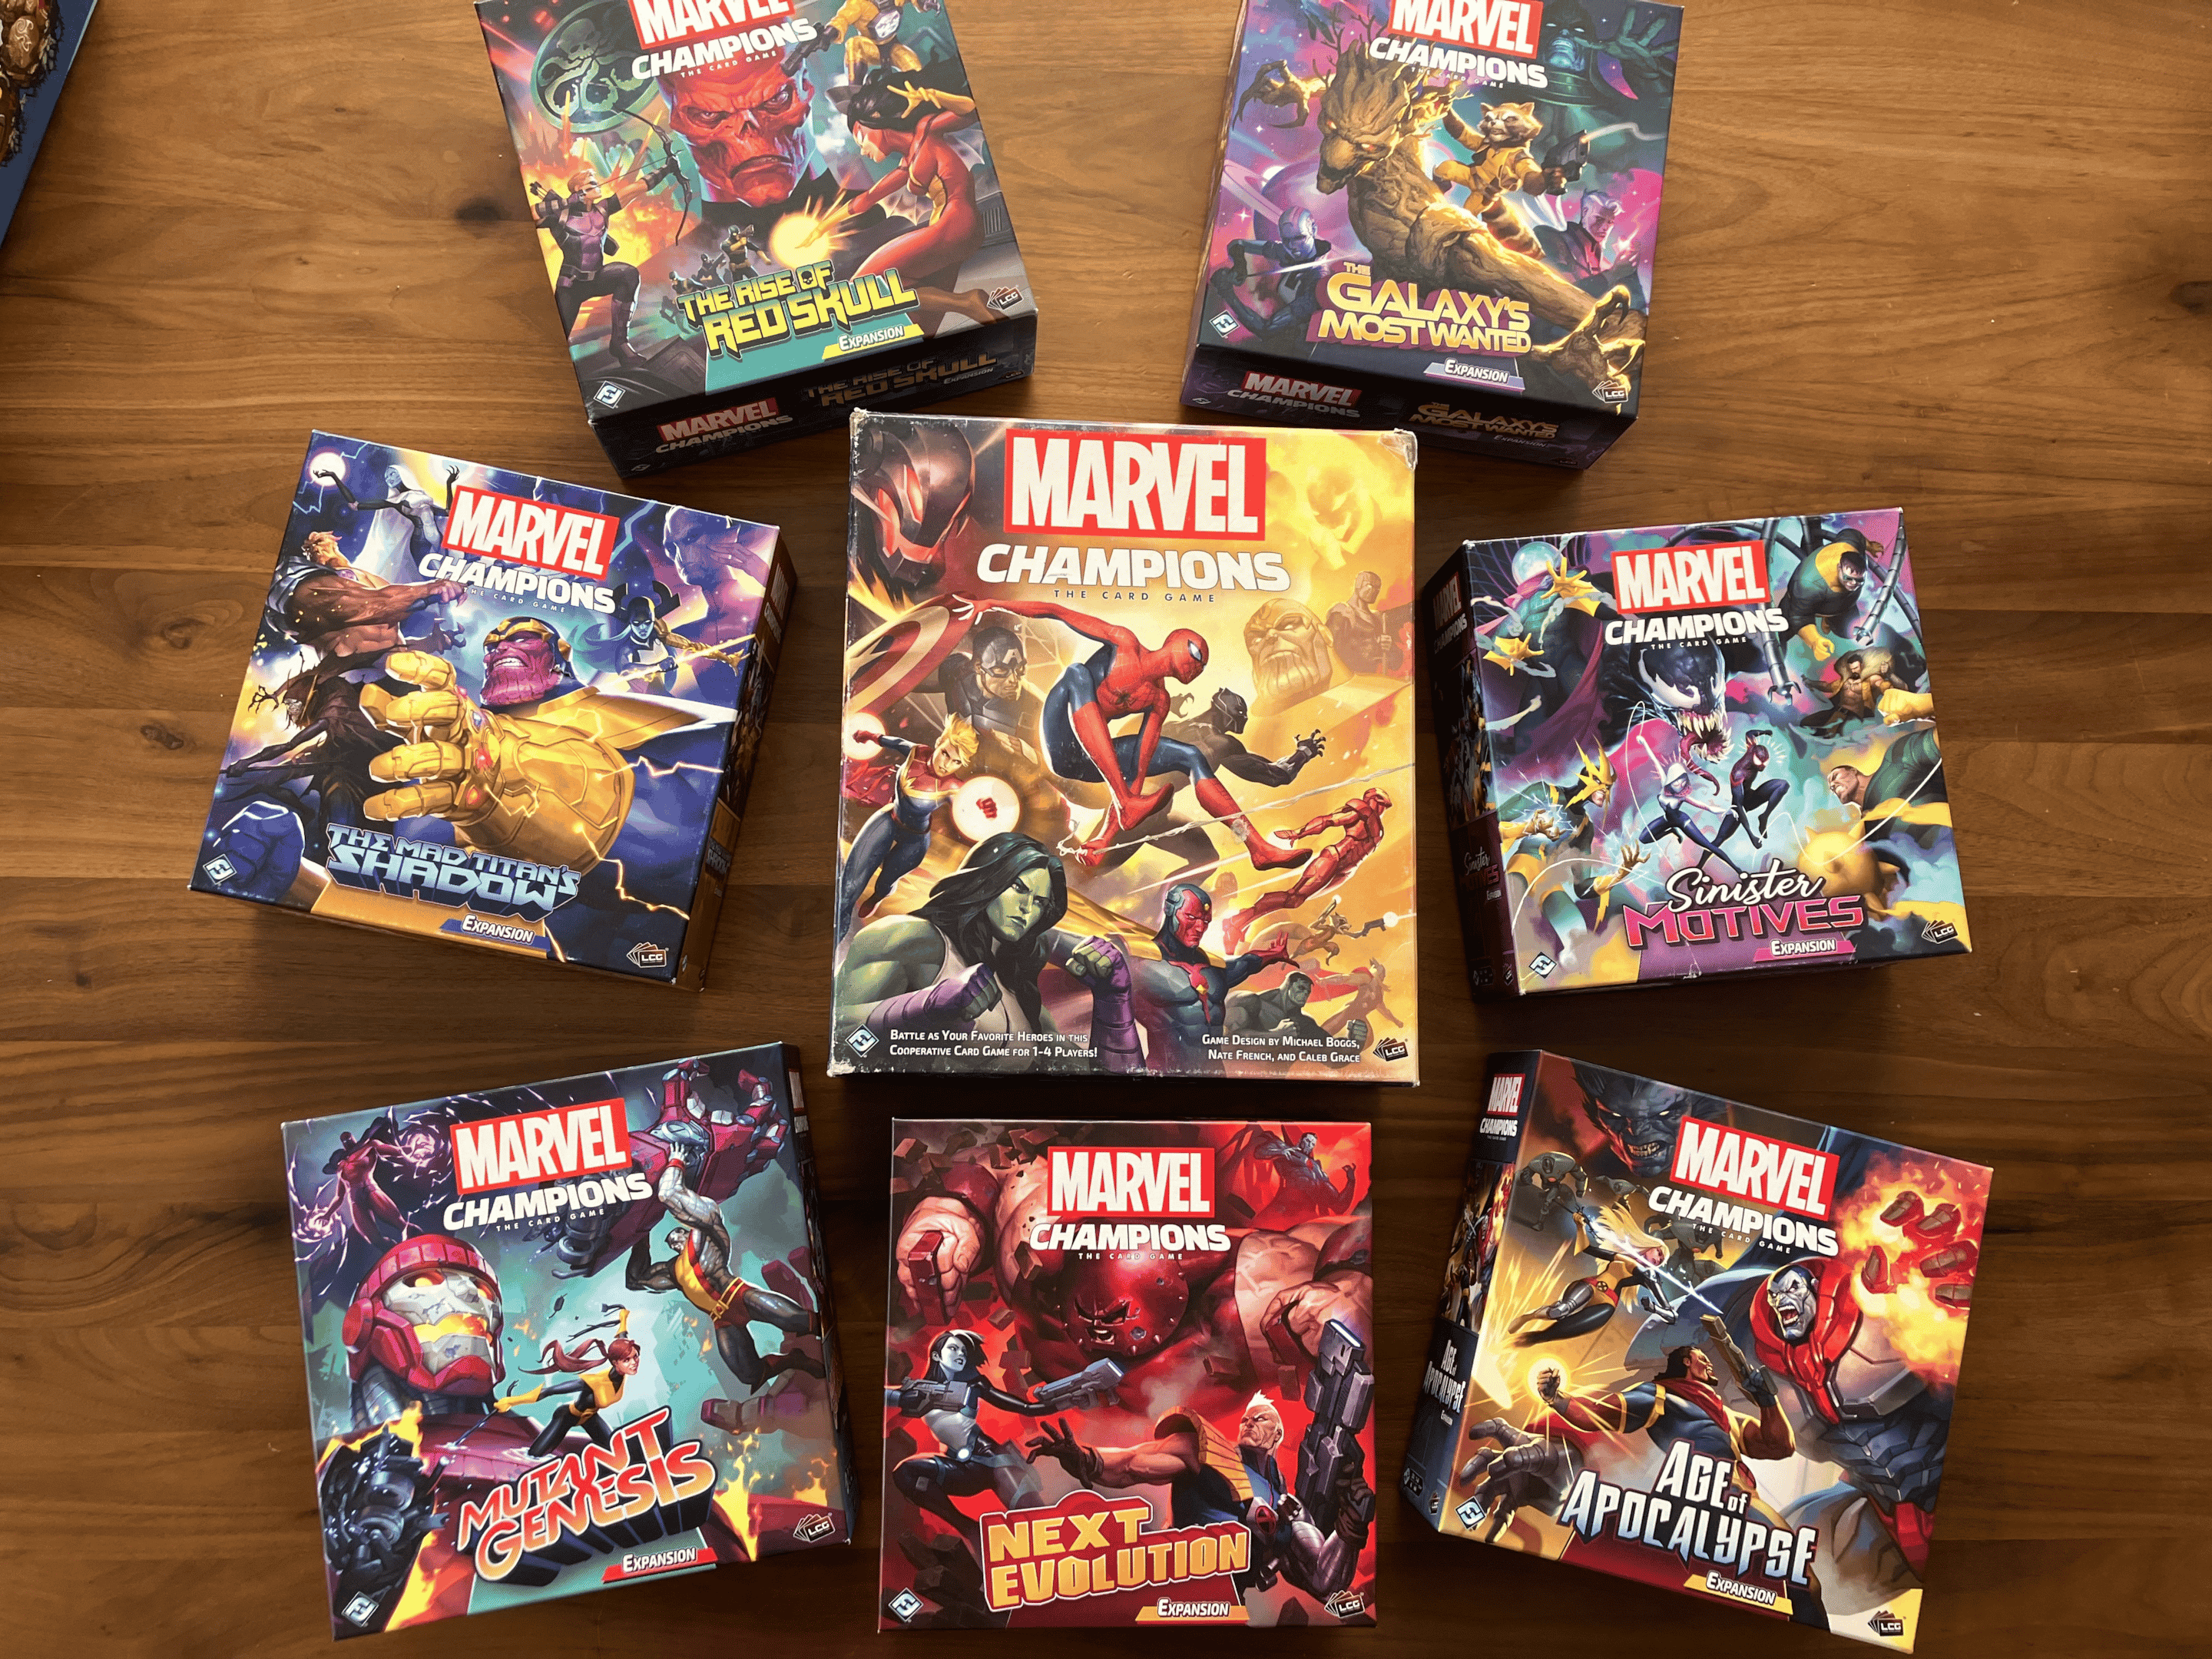 Marvel champions core box and all campaign expansion boxes